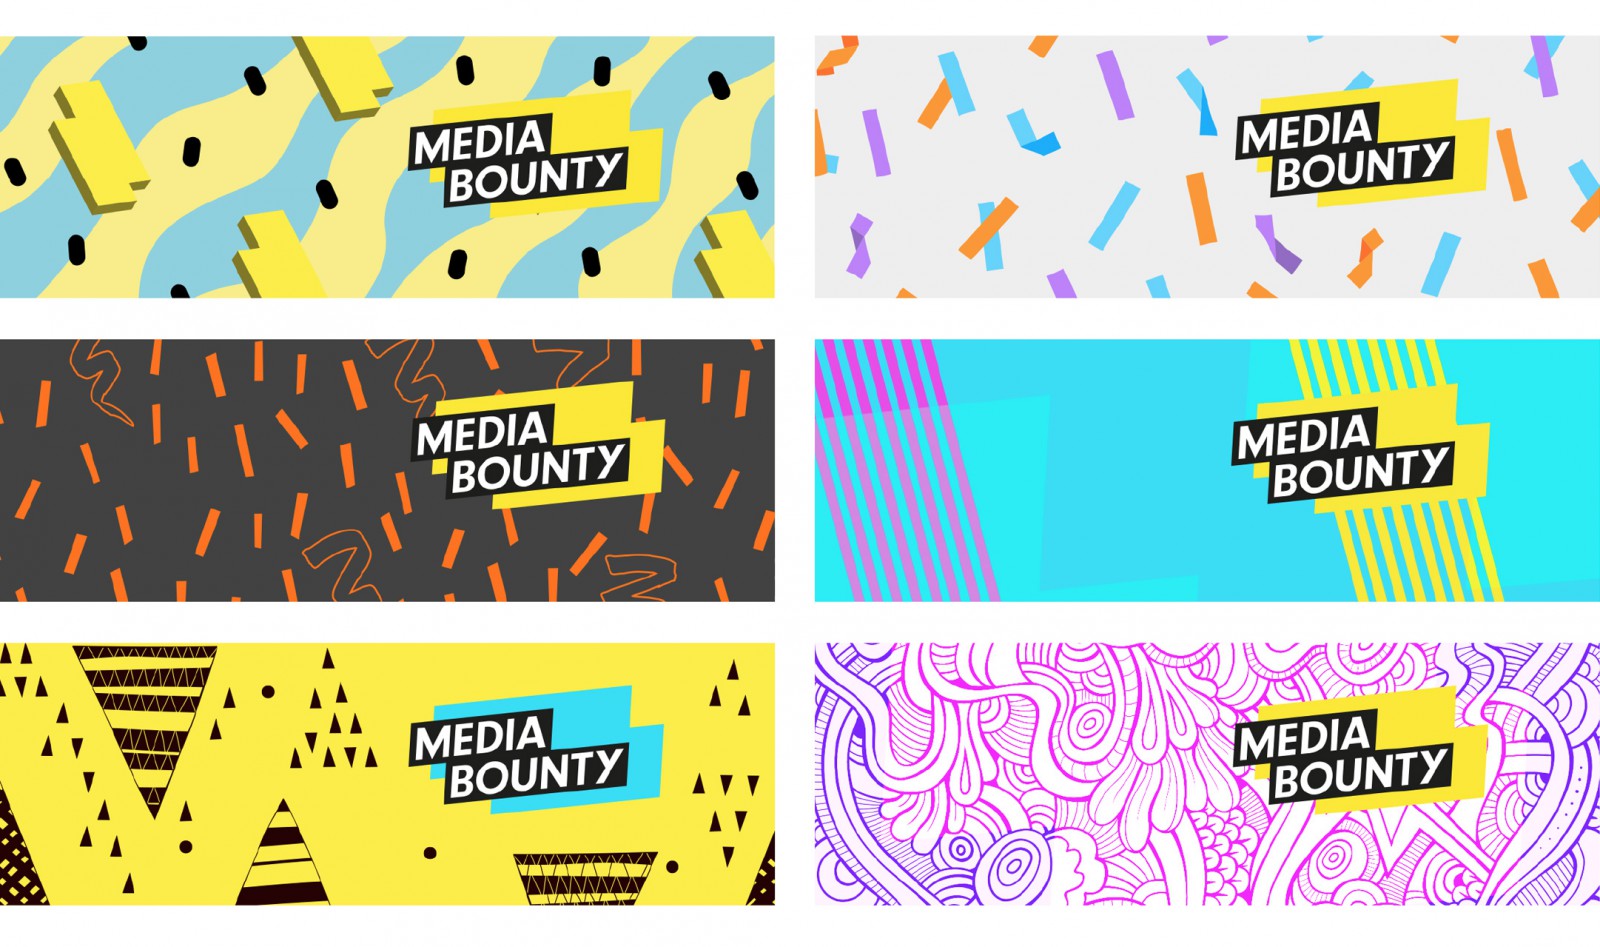 An adaptive brand approach for Media Bounty – A Brand Entertainment Agency - Full width Image